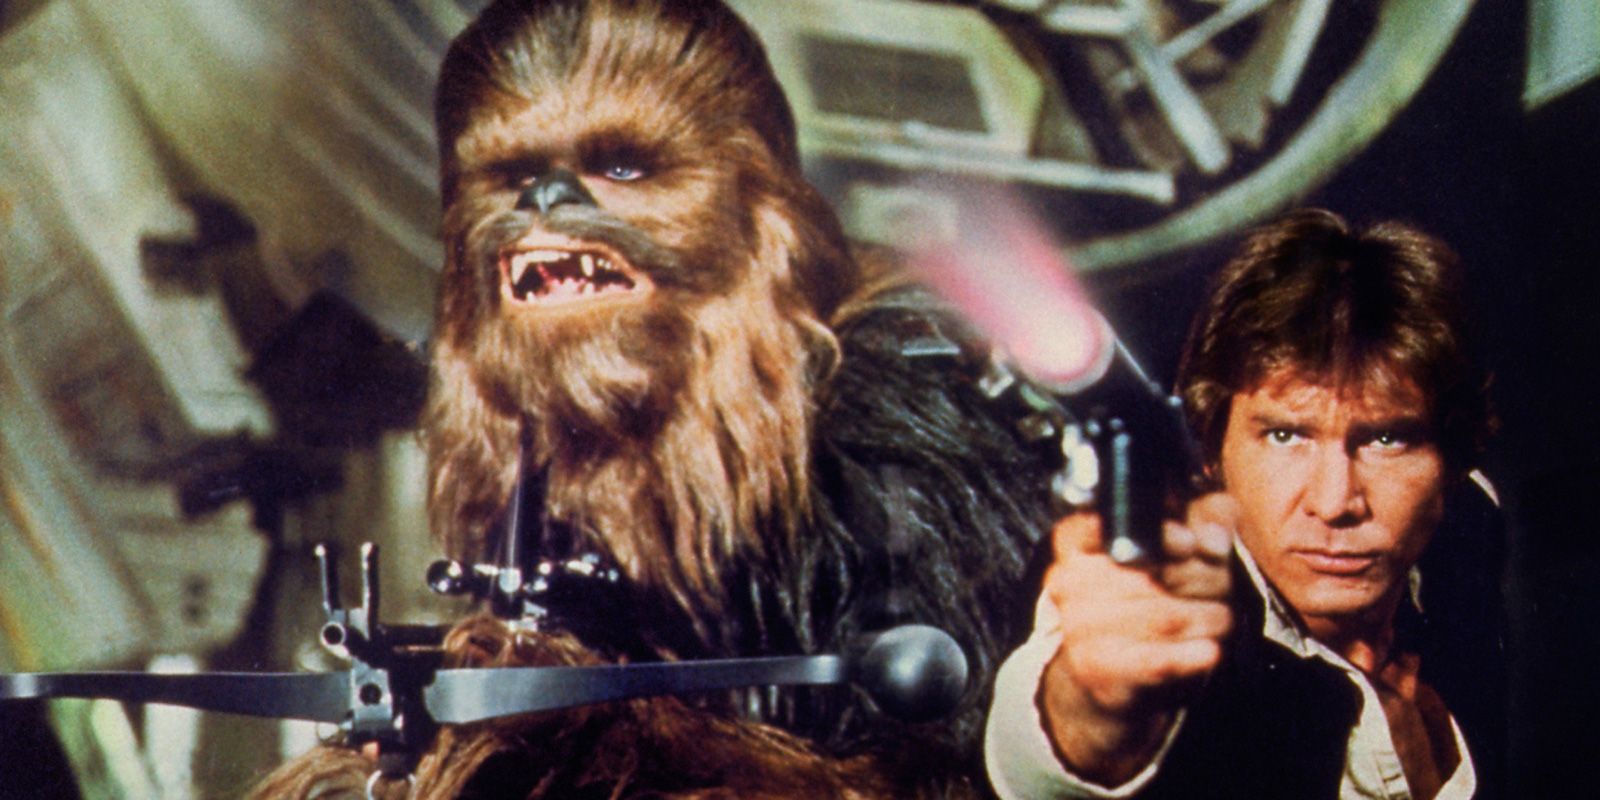 Behind-The-Scenes Star Wars Video Shows What Chewbacca REALLY Says